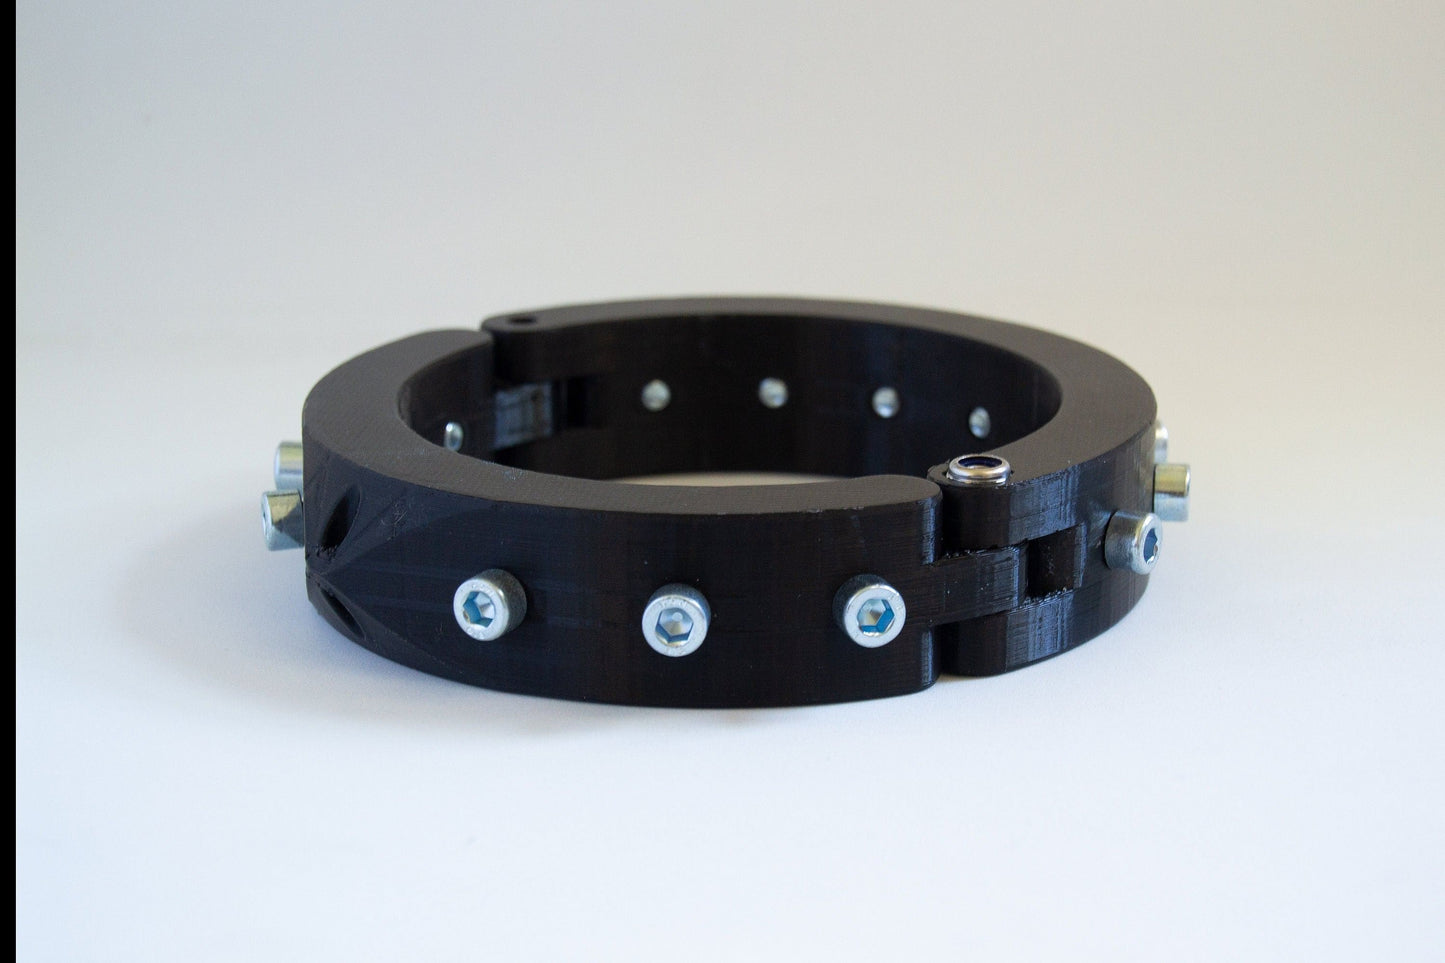 Black 3d printed bdsm collar adorned with bolts